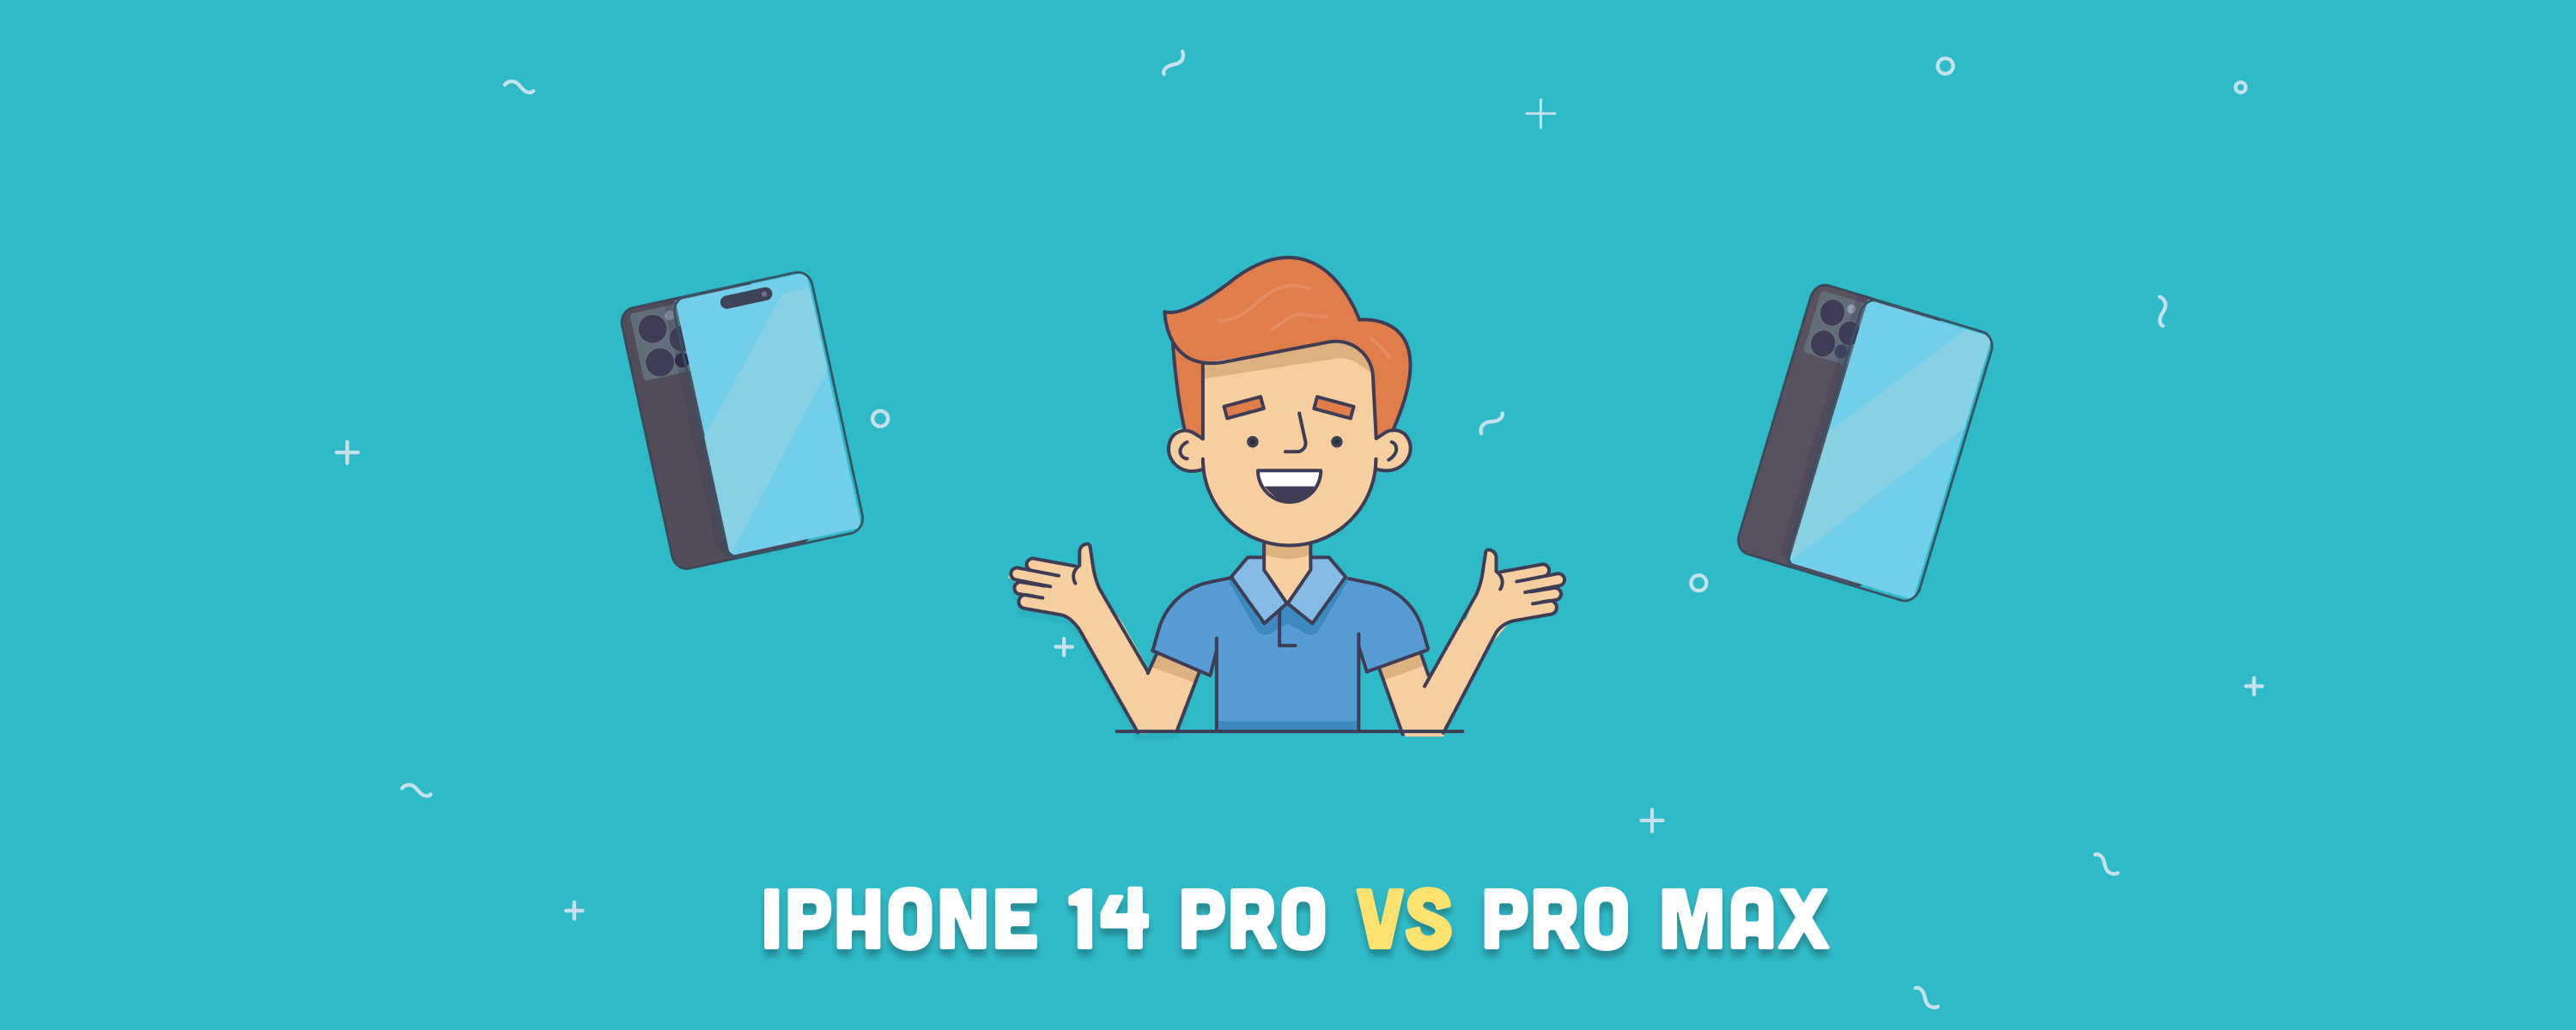 iPhone 14 Pro vs. Pro Max: What Are the Differences?